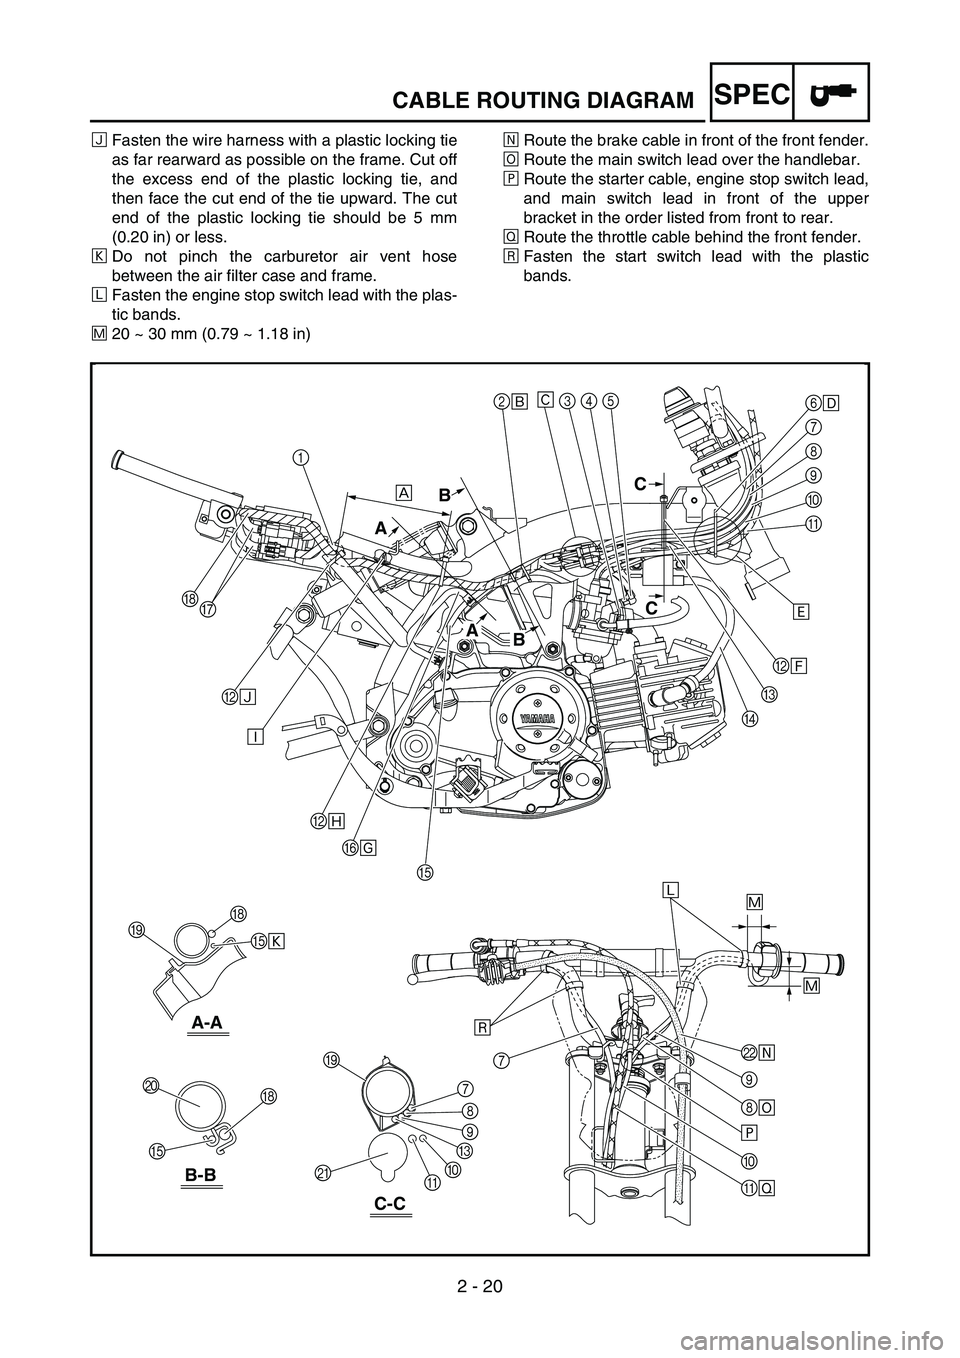 YAMAHA TTR50 2006  Betriebsanleitungen (in German) 
2 - 20
SPECCABLE ROUTING DIAGRAM
ÑFasten the wire harness with a plastic locking tie
as far rearward as possible on the frame. Cut off
the excess end of the plastic locking tie, and
then face the cu